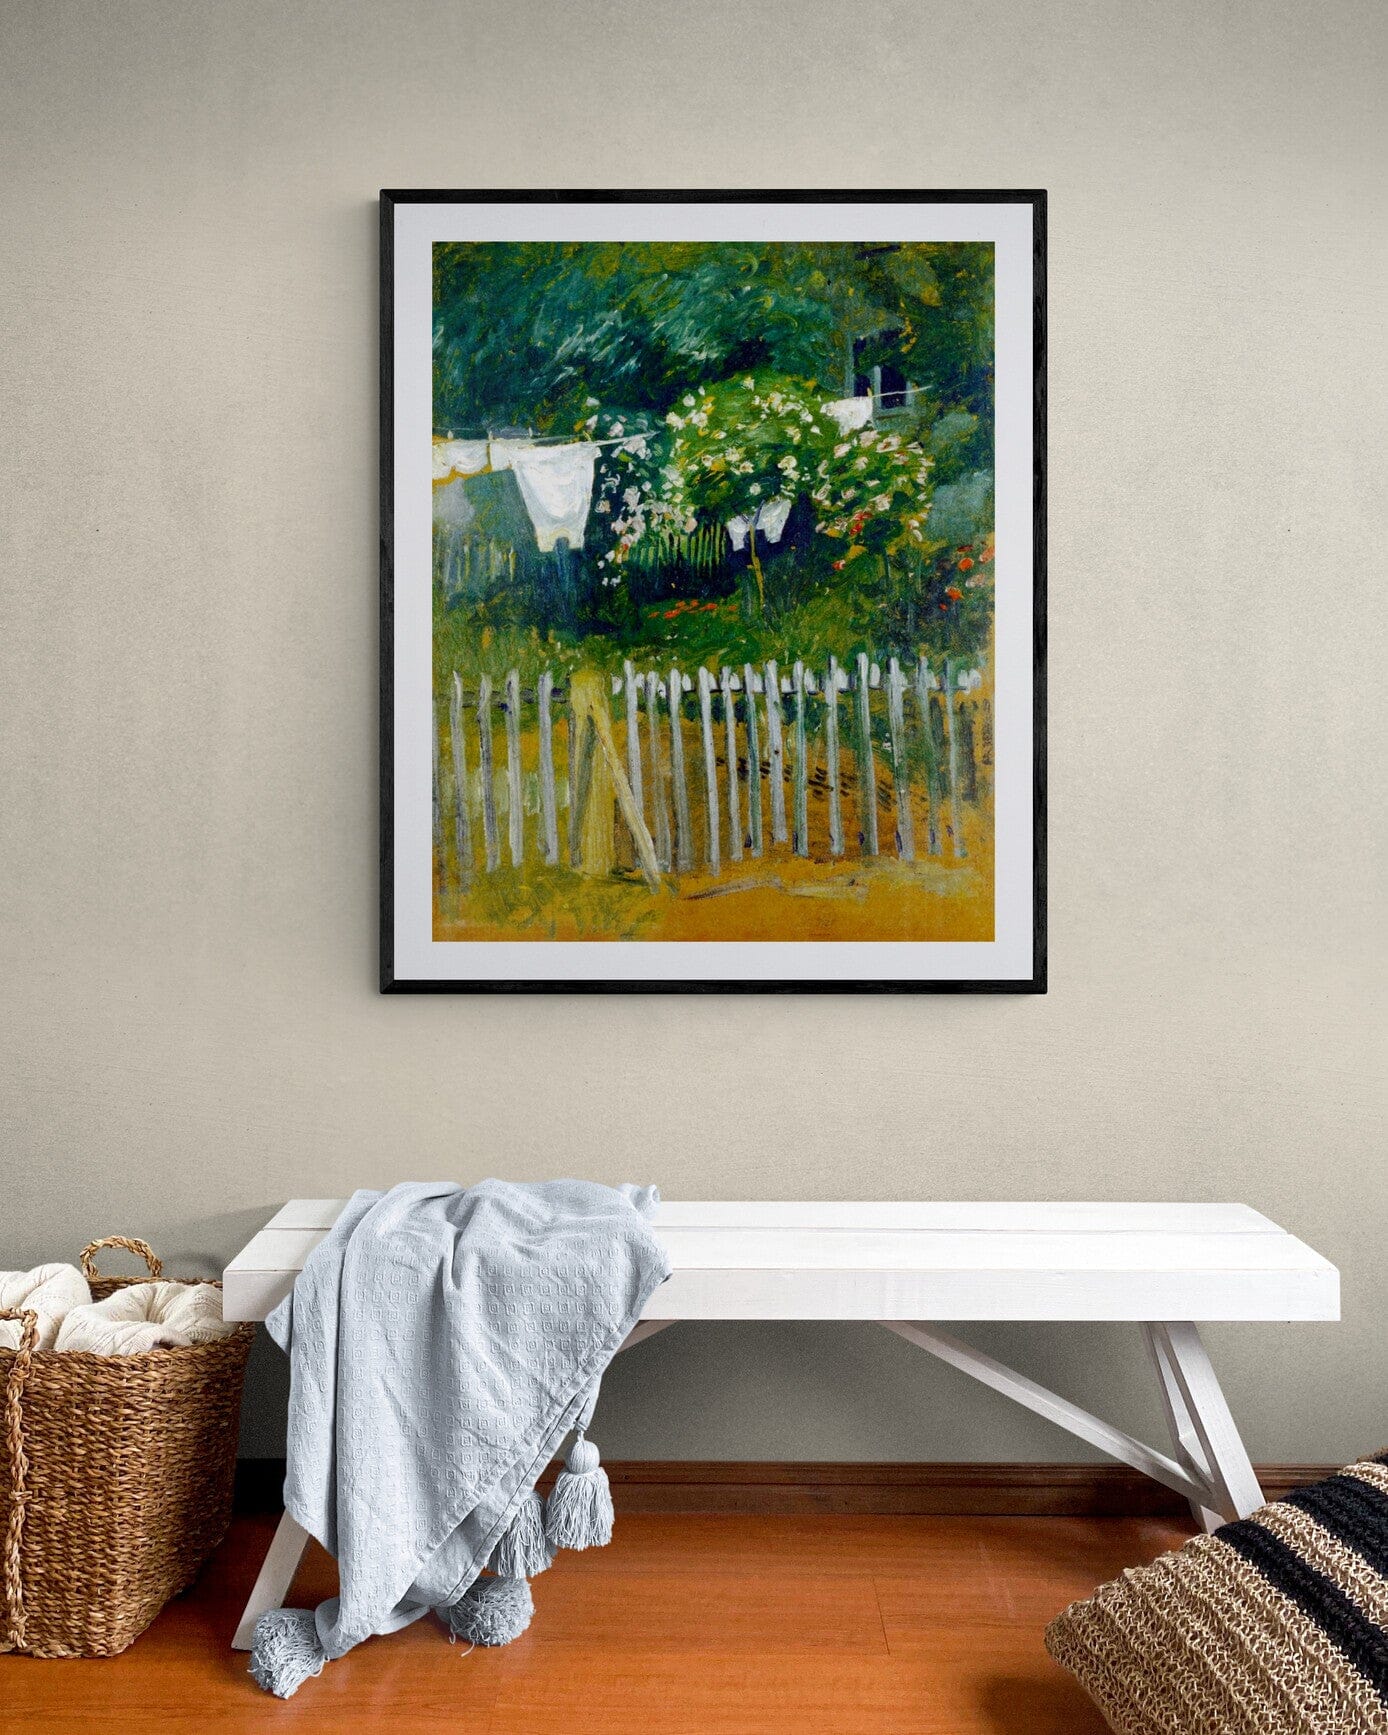 Laundry in the garden (1900s) | Laundry room wall art | August Macke Posters, Prints, & Visual Artwork The Trumpet Shop Vintage Prints   